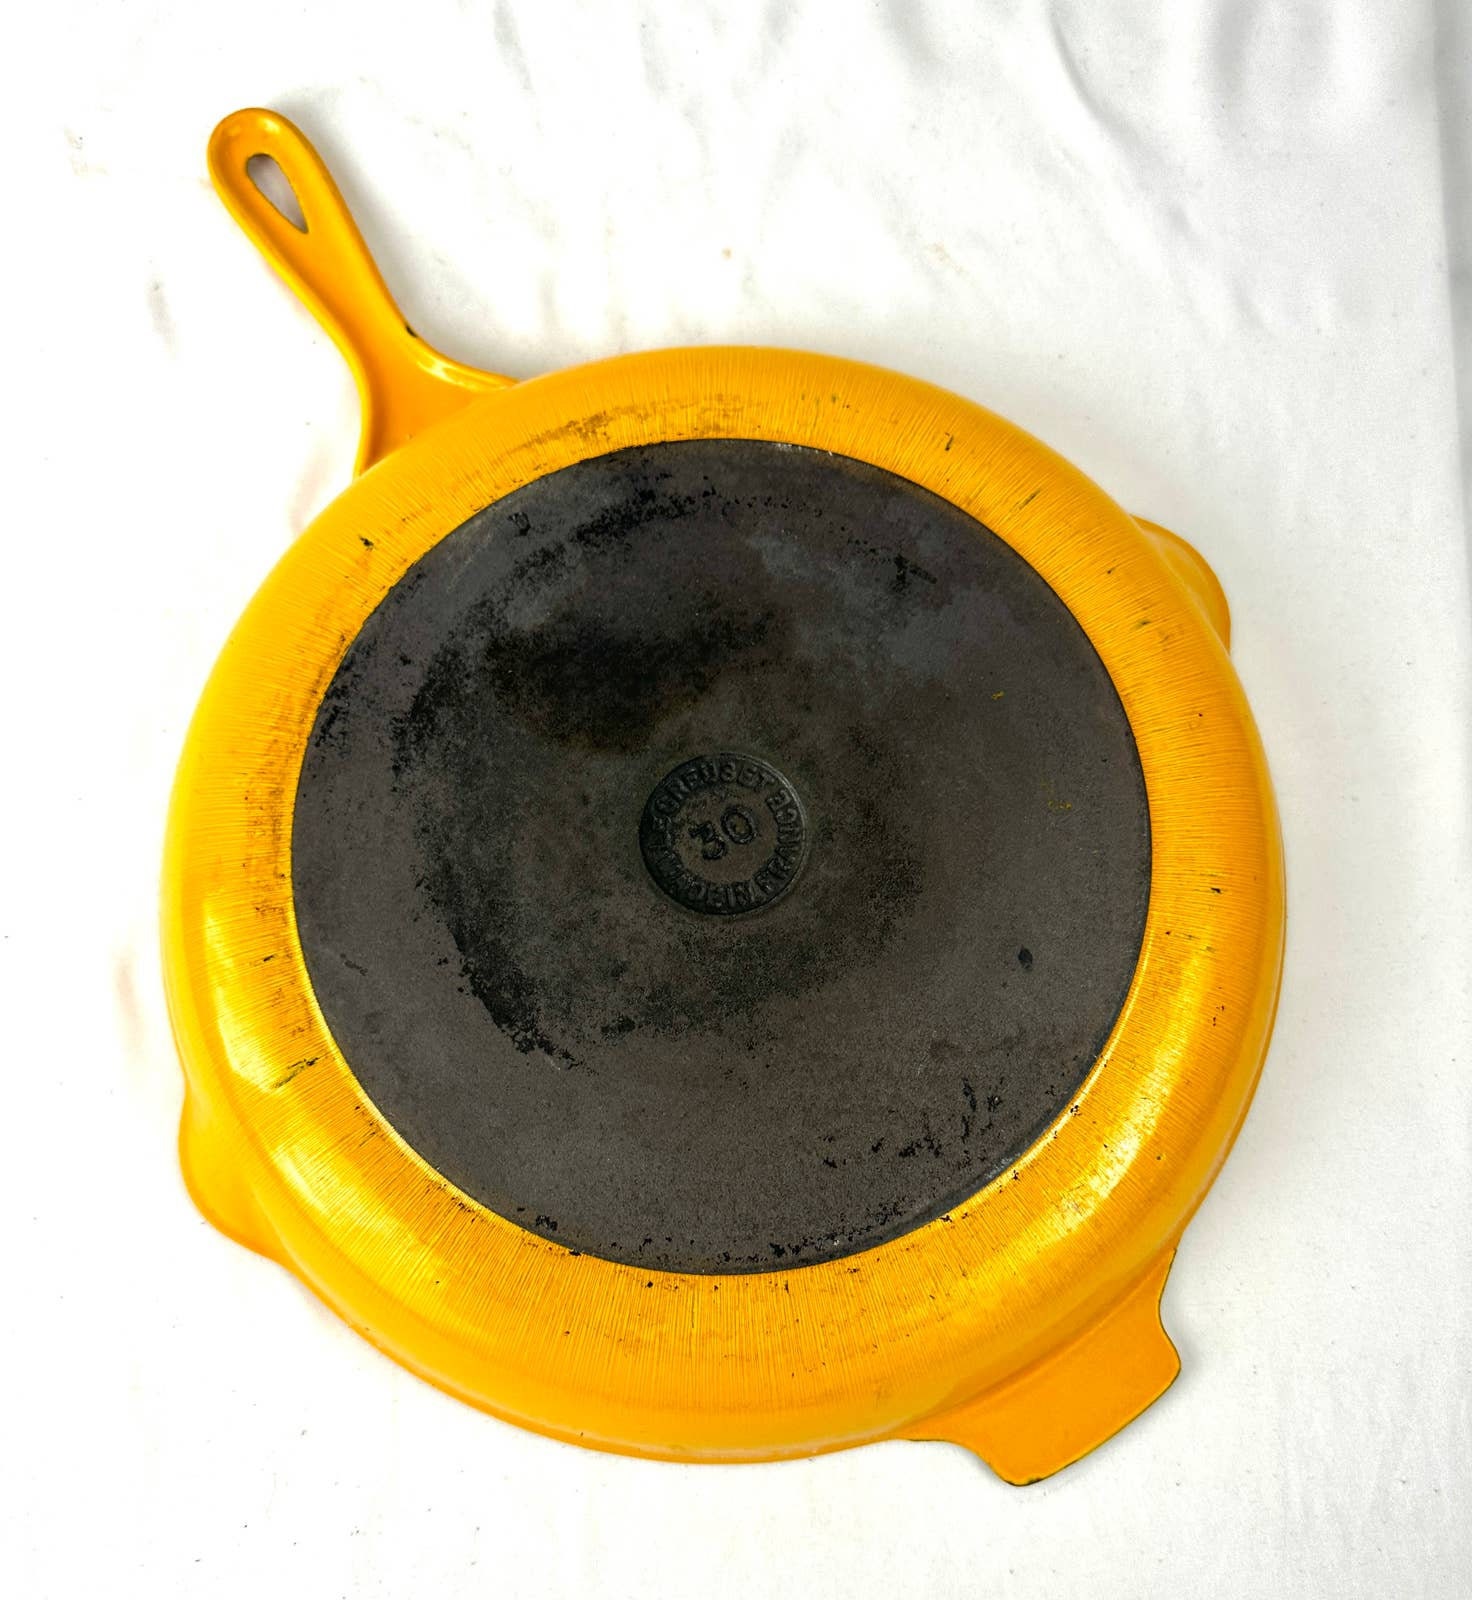 Le Creuset #26 France Yellow Enameled Cast Iron Square Grill Pan Skillet 10